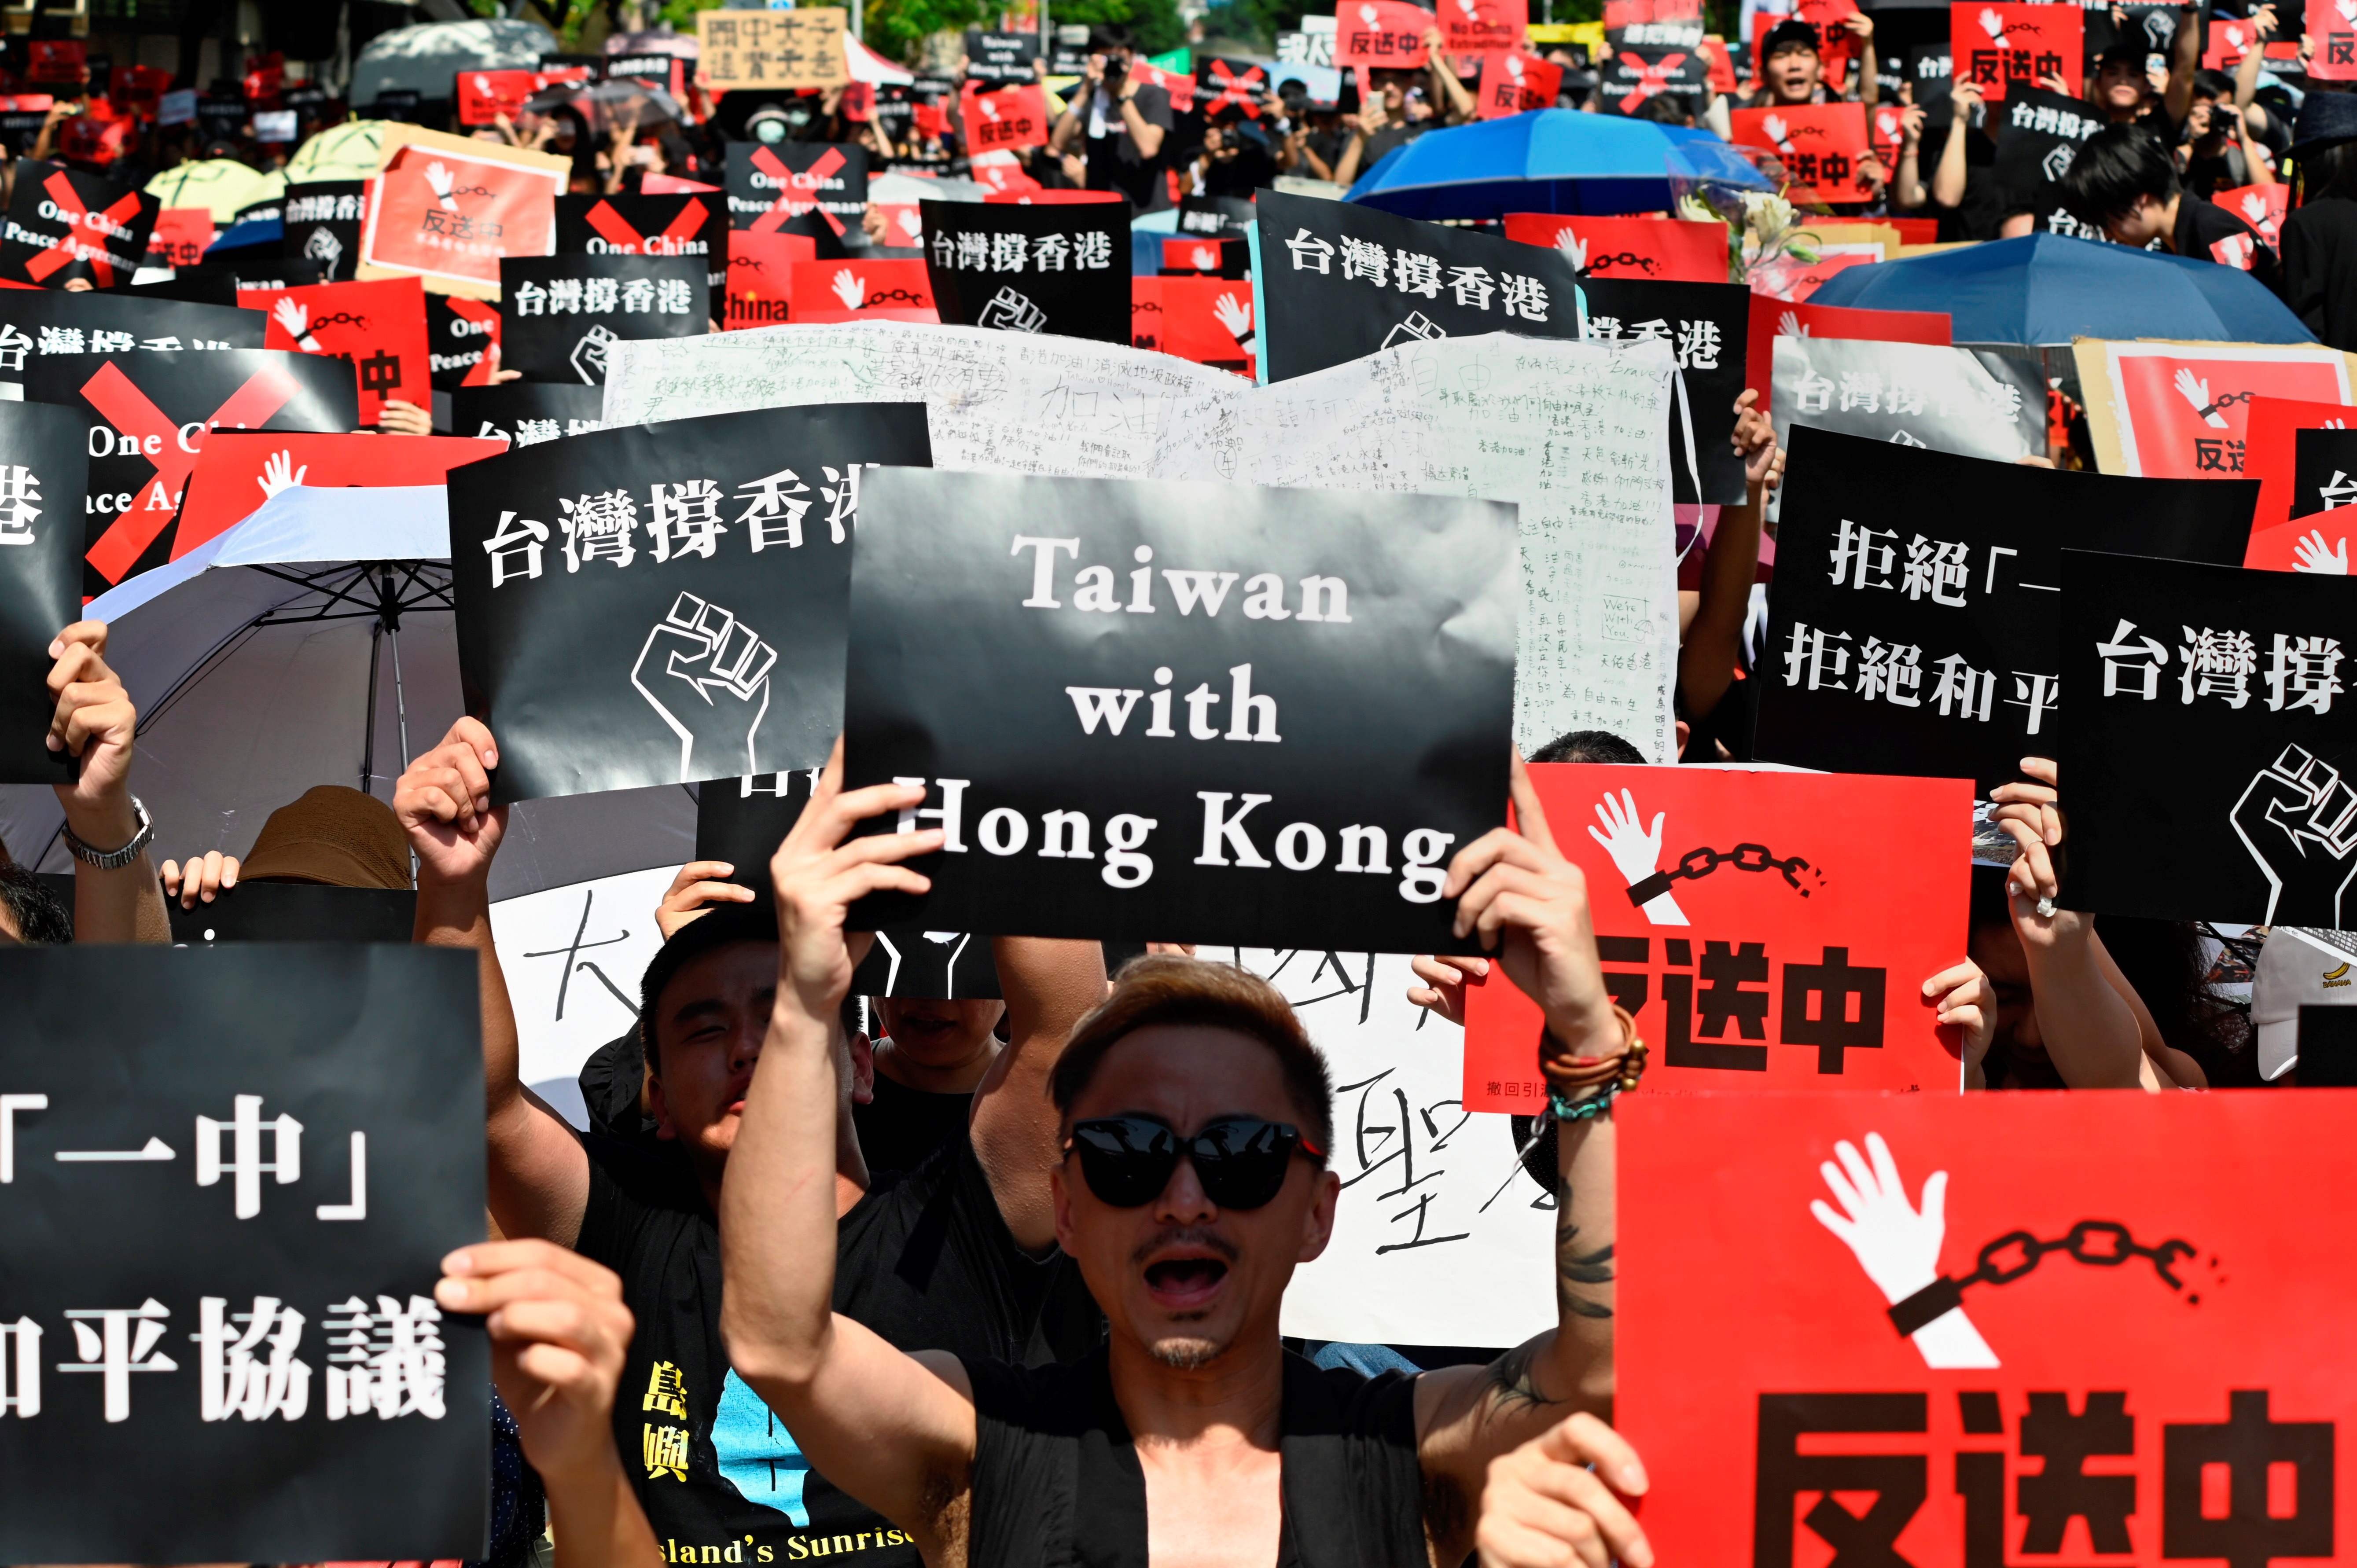 Many in Taiwan have been concerned about developments in Hong Kong. Photo: AFP